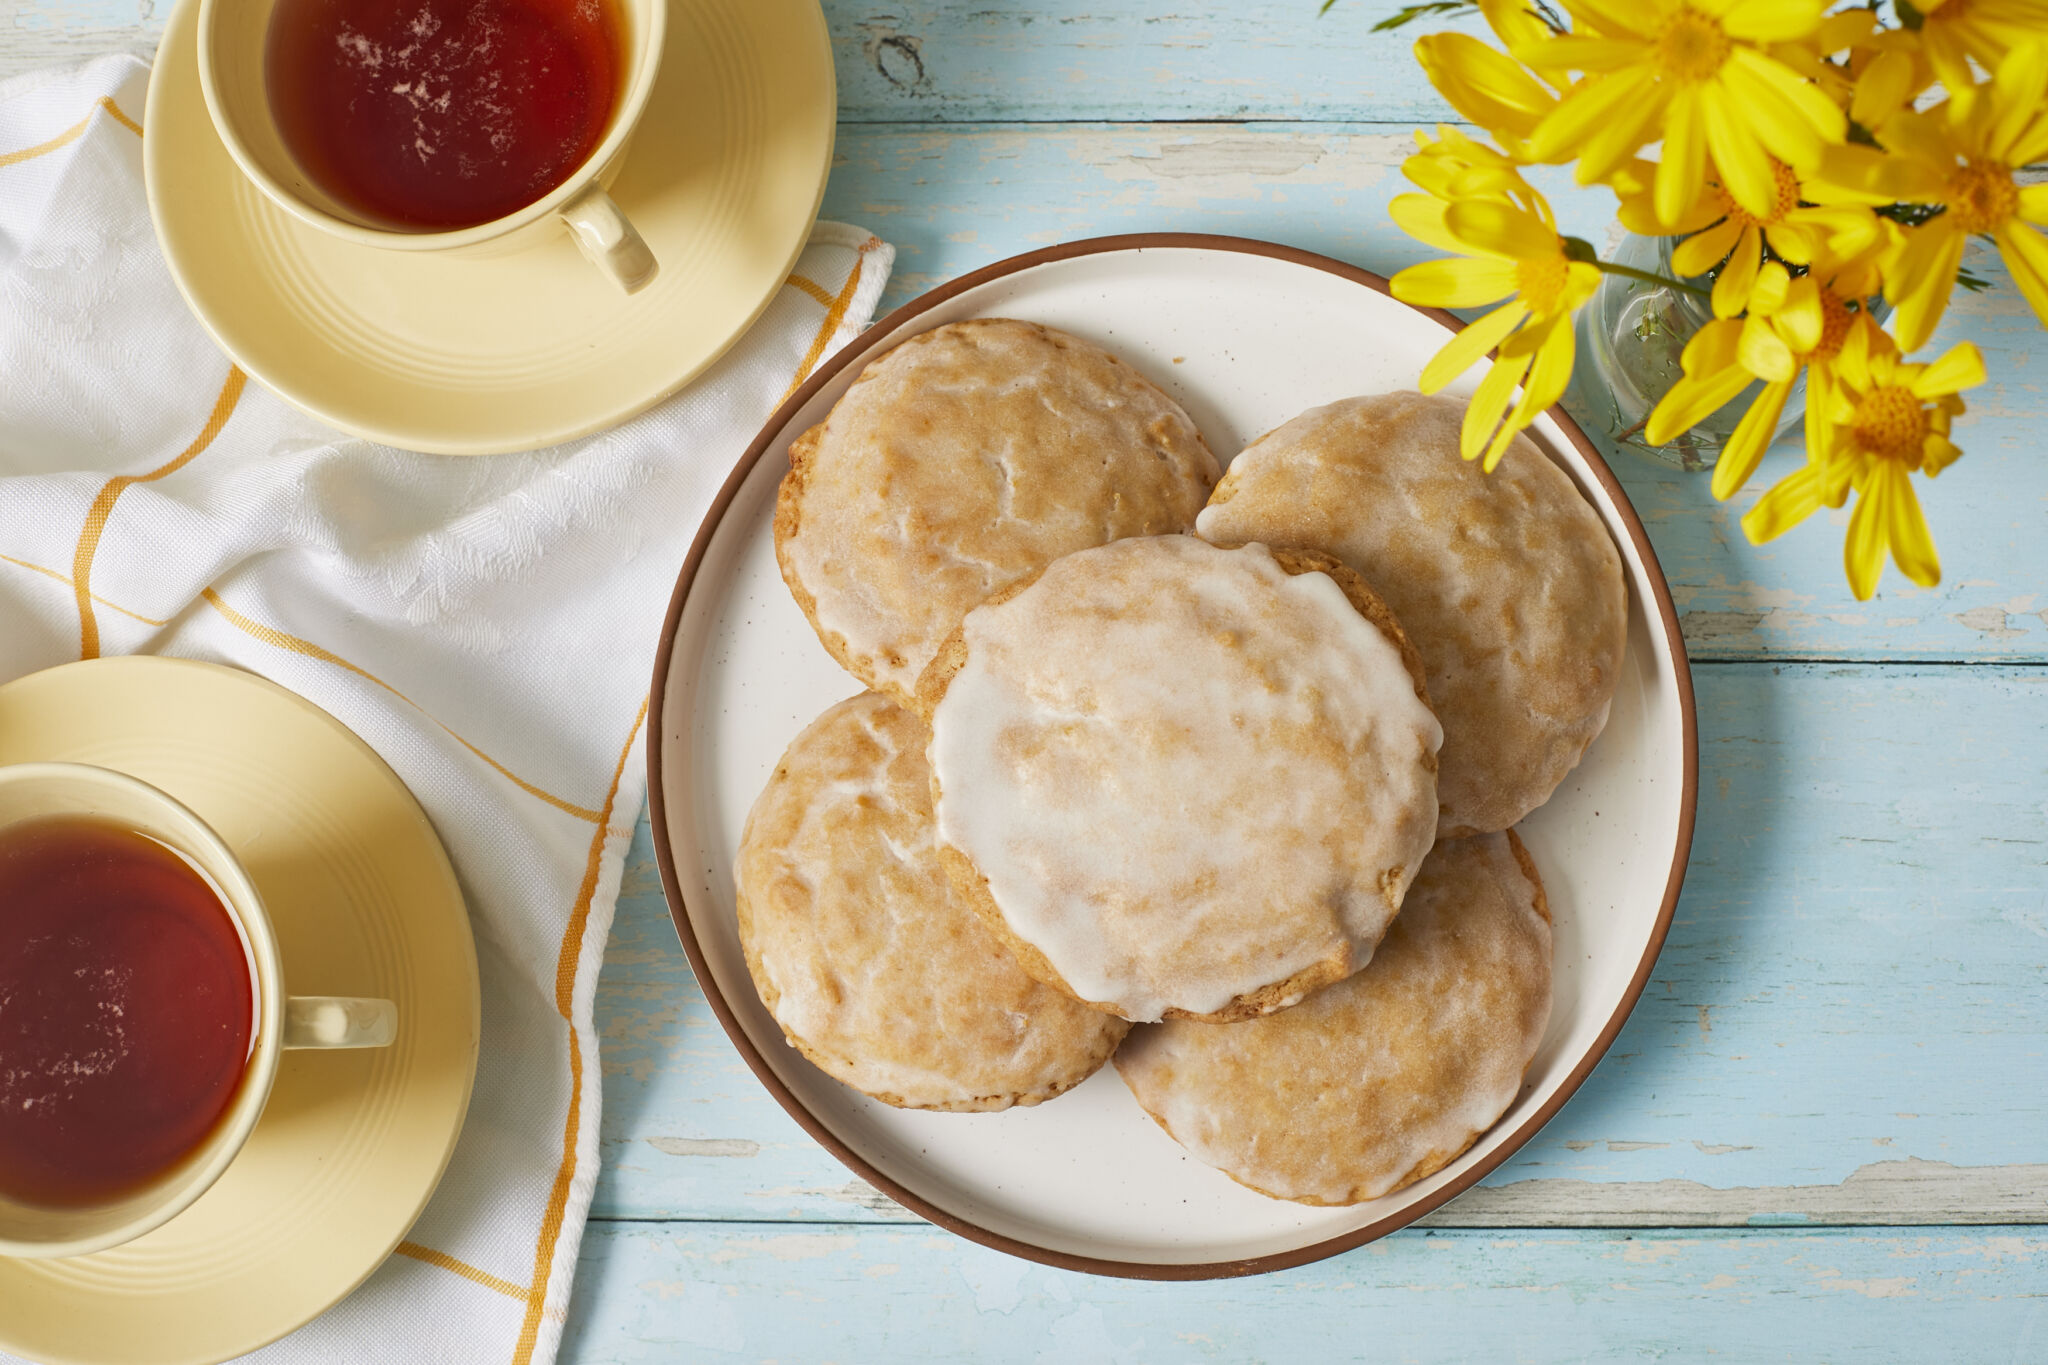 Baked Soft Lemon Cookies dipped with Zesty Lemon Glaze, served on a plate with tea on the side.